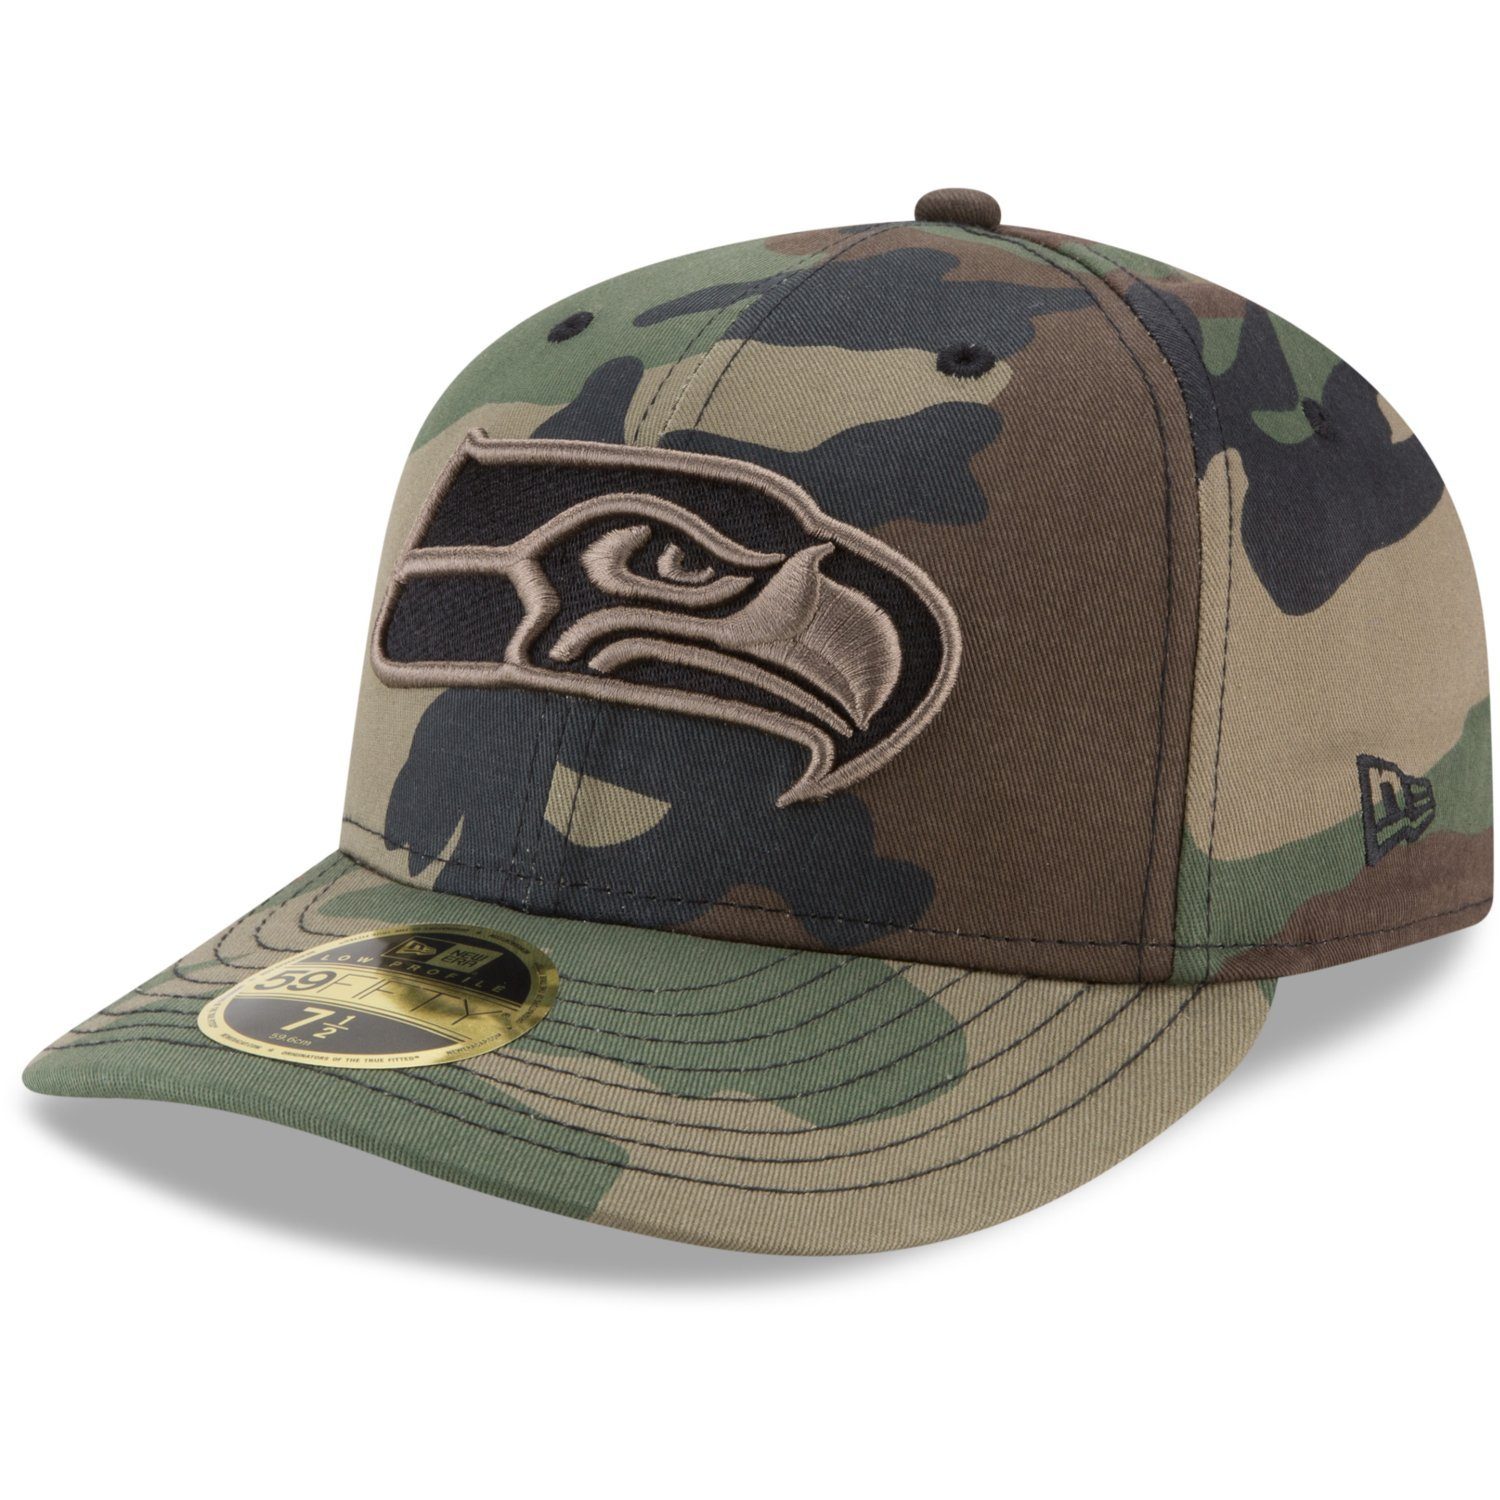 Low Profile Fitted Teams woodland NFL New Cap 59Fifty Era Seattle Seahawks